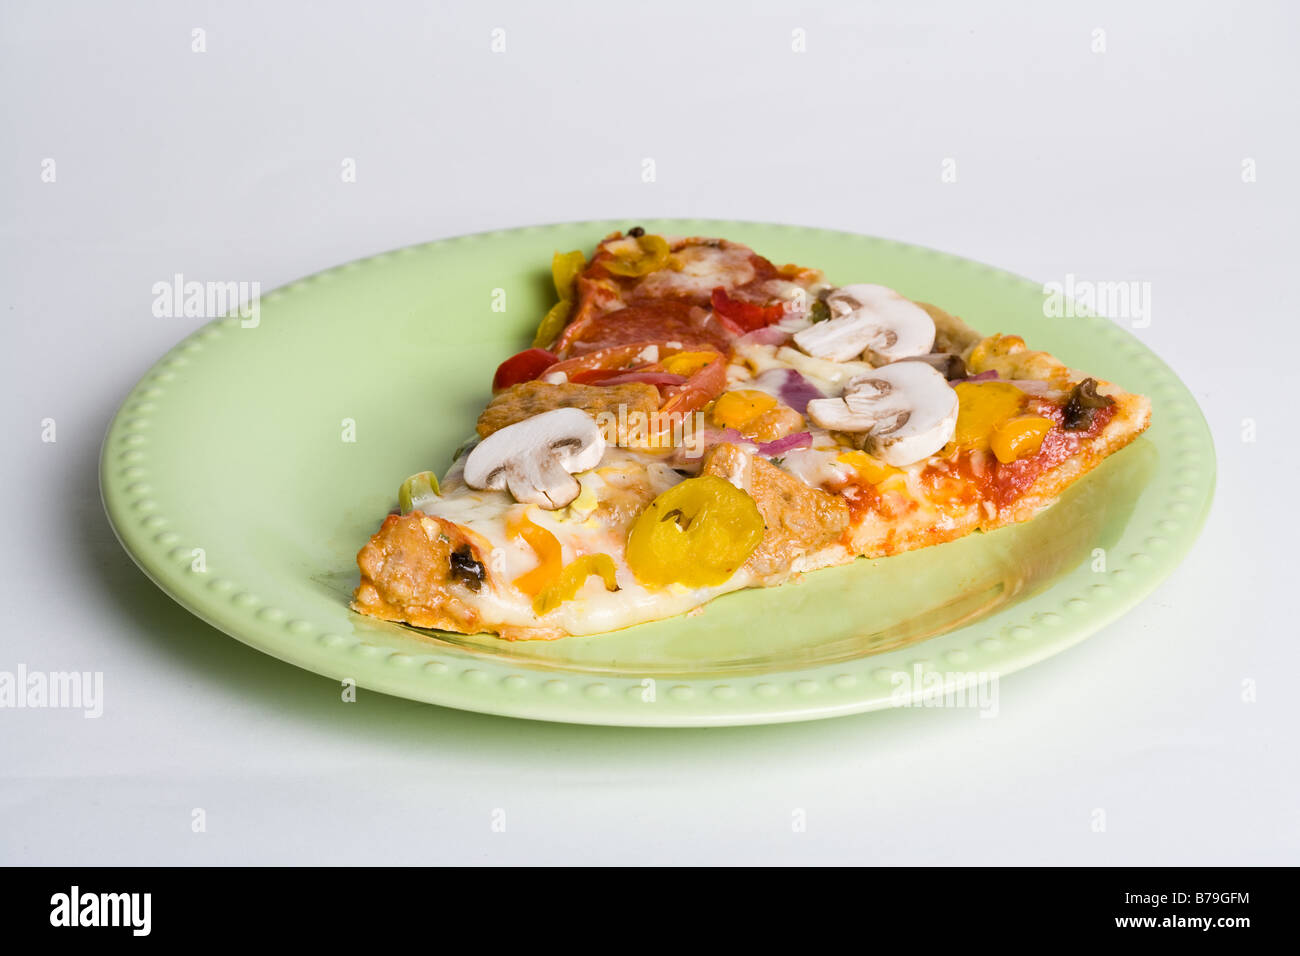 A piece of pizza Stock Photo